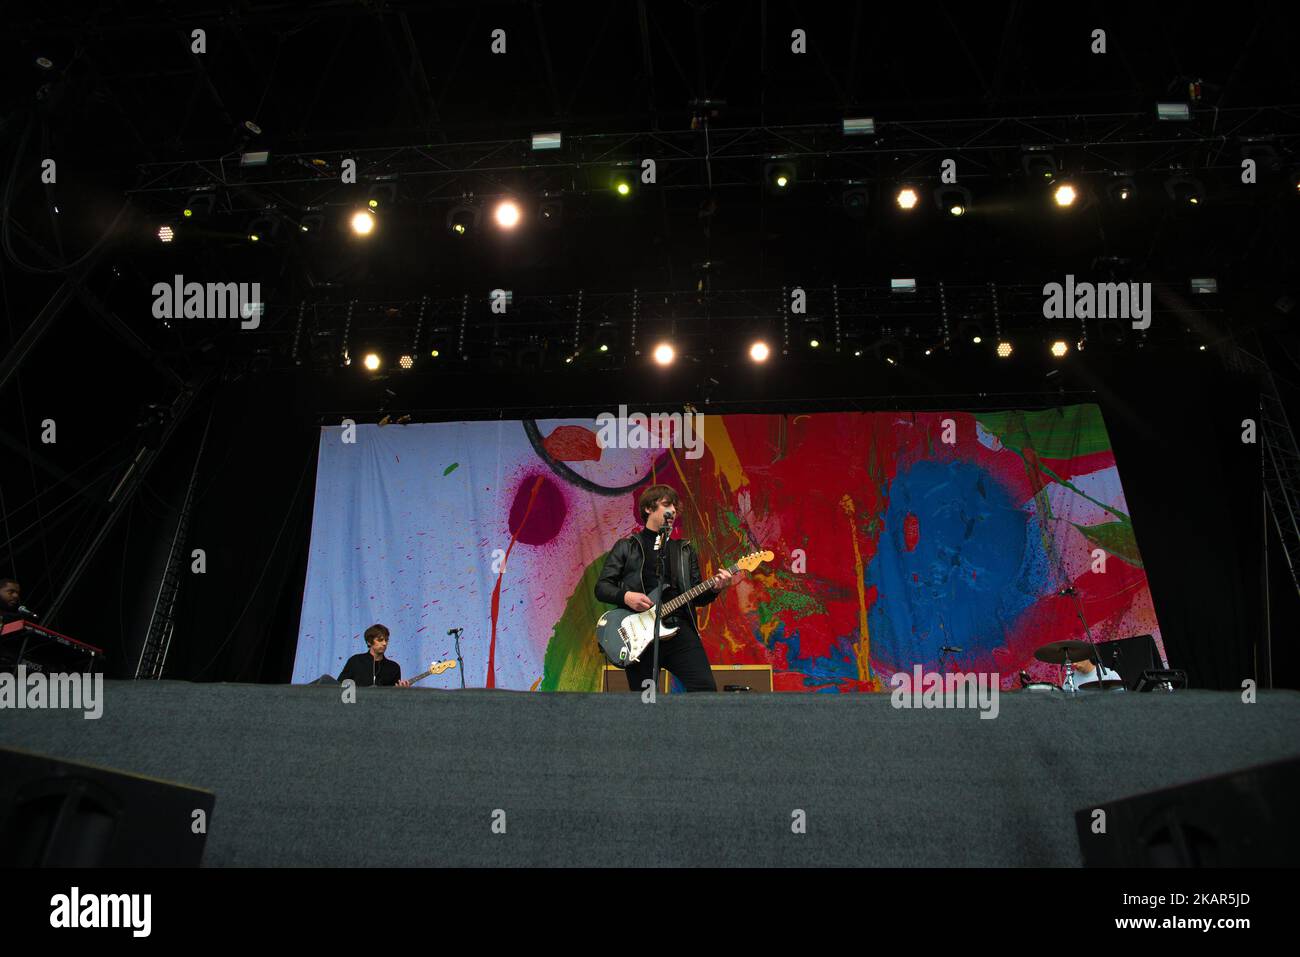 Enghish singer and songwriter Jake Bugg performs on stage at OnBlackheath Festival in London, on September 10, 2017. He released his fourth studio album titled Hearts That Strain, on 1st September 2017. (Photo by Alberto Pezzali/NurPhoto) Stock Photo